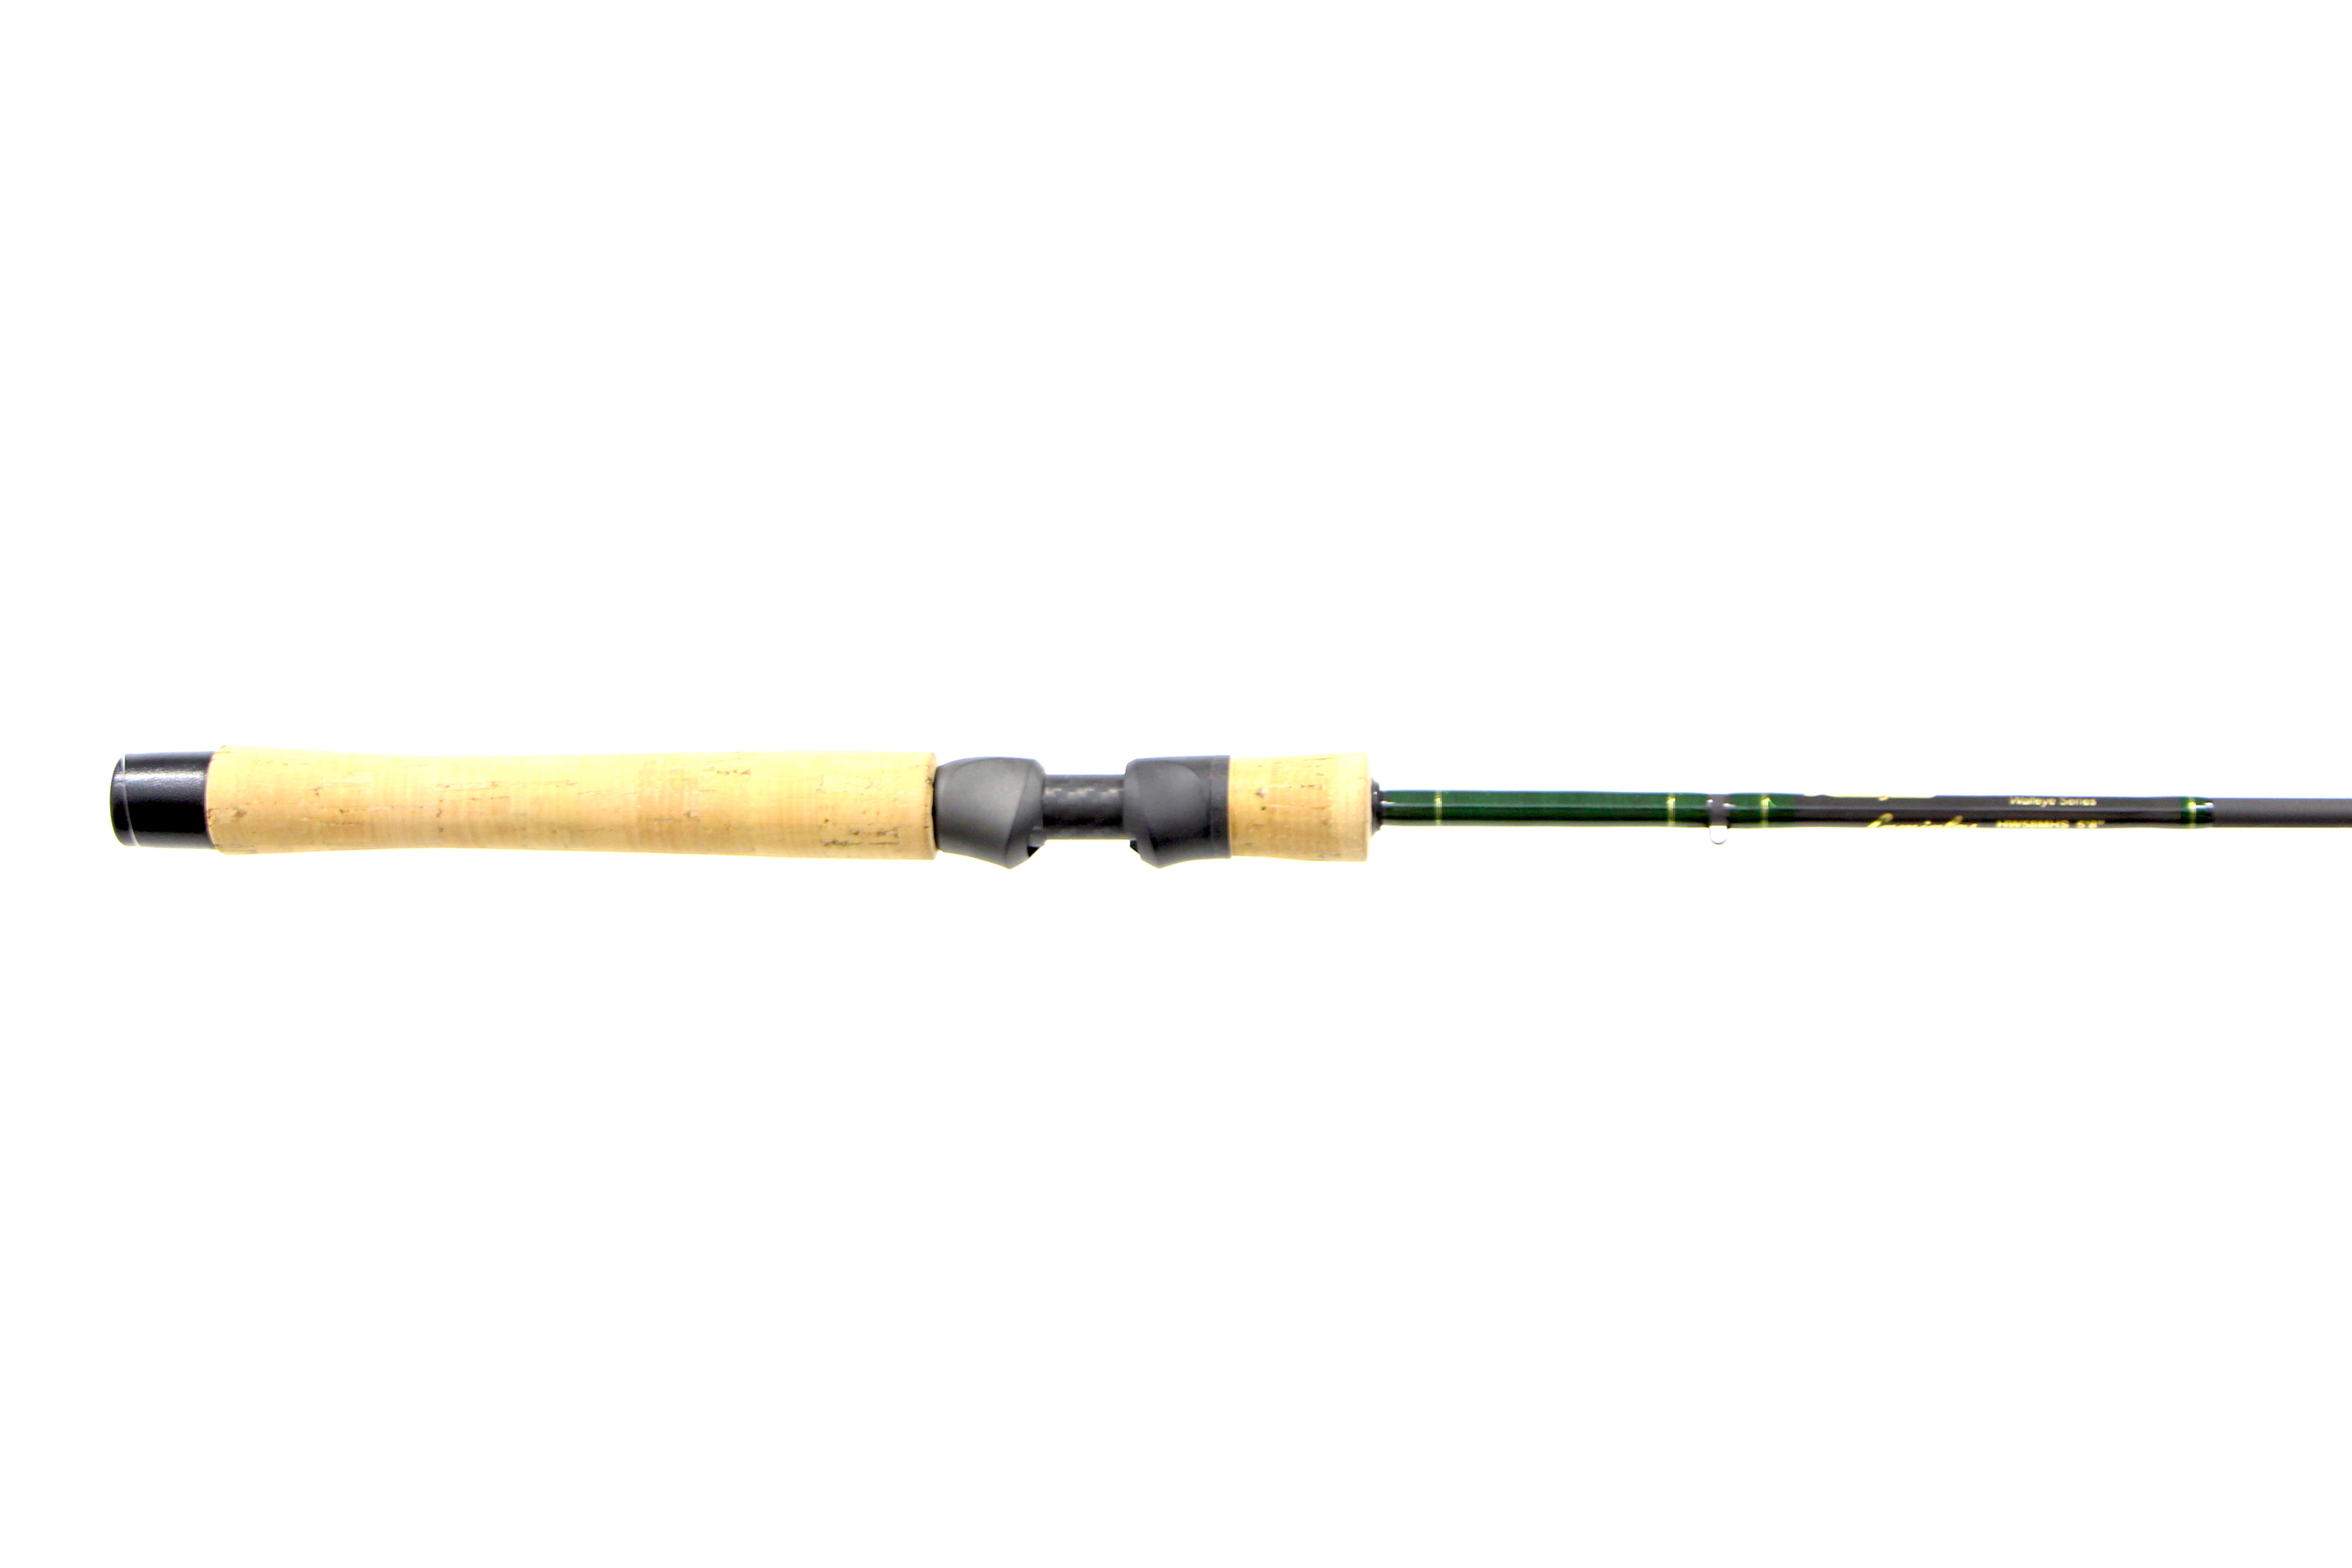 Lamiglas Hammer Walleye 1 Piece, Medium-Heavy Extra-Fast, Spinning Rod , Up  to 13% Off with Free S&H — CampSaver